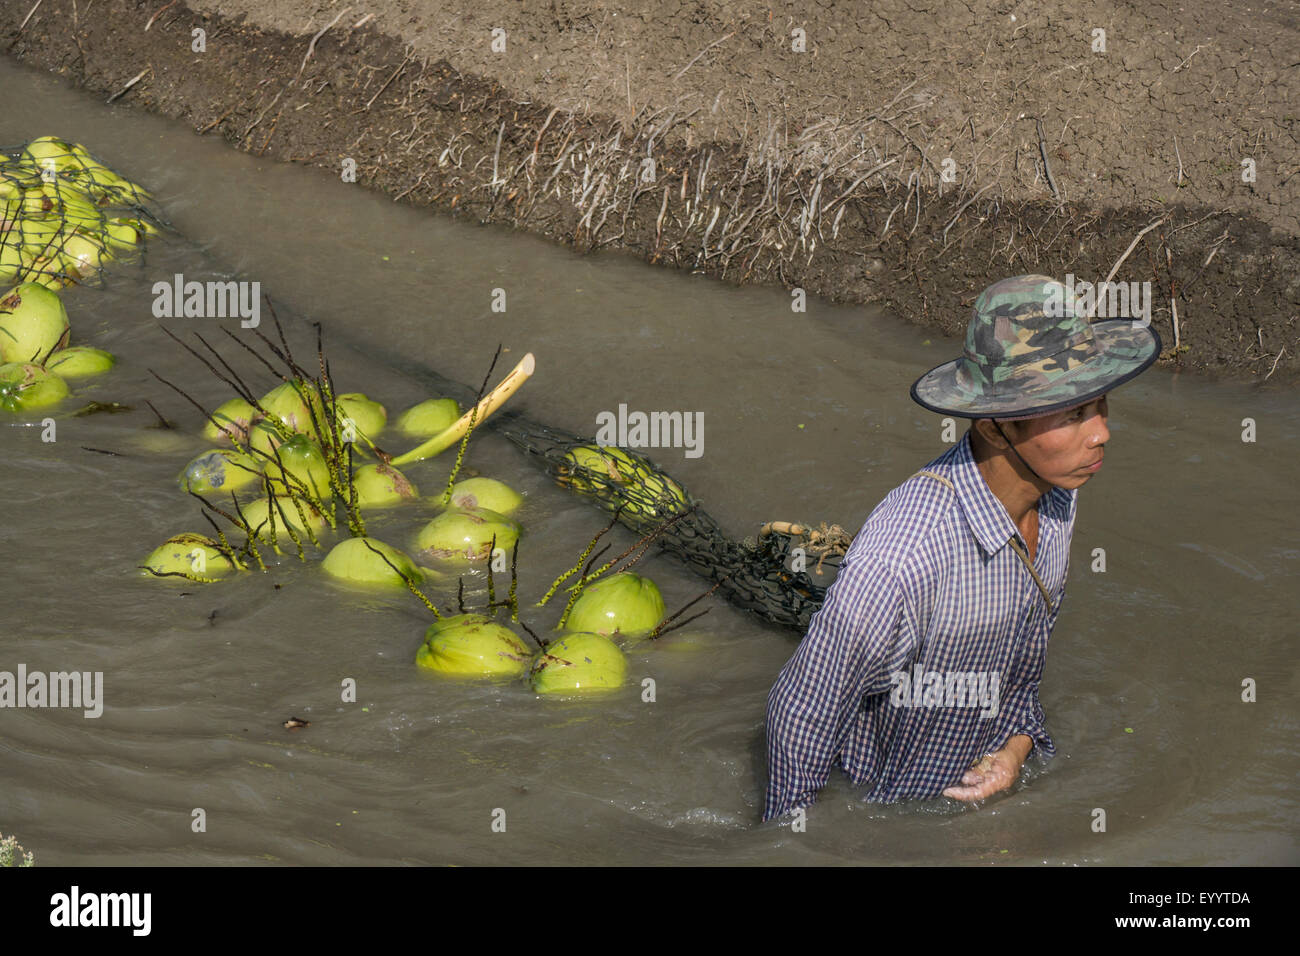 coconut palm (Cocos nucifera), swimming harvested coconuts transporting in waterways, Thailand Stock Photo